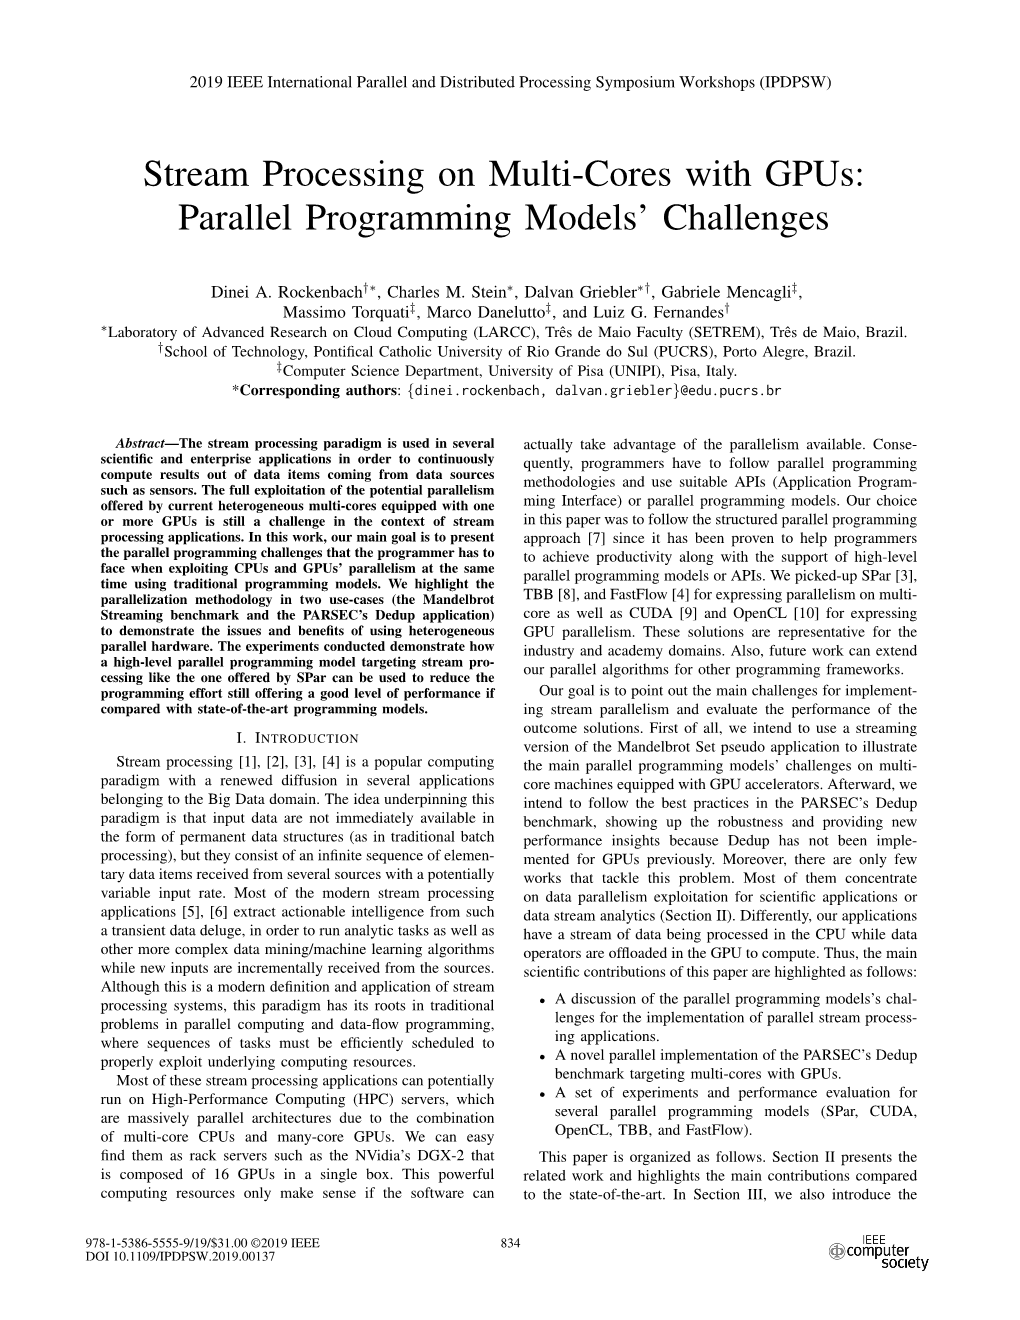 Stream Processing on Multi-Cores with Gpus: Parallel Programming Models’ Challenges